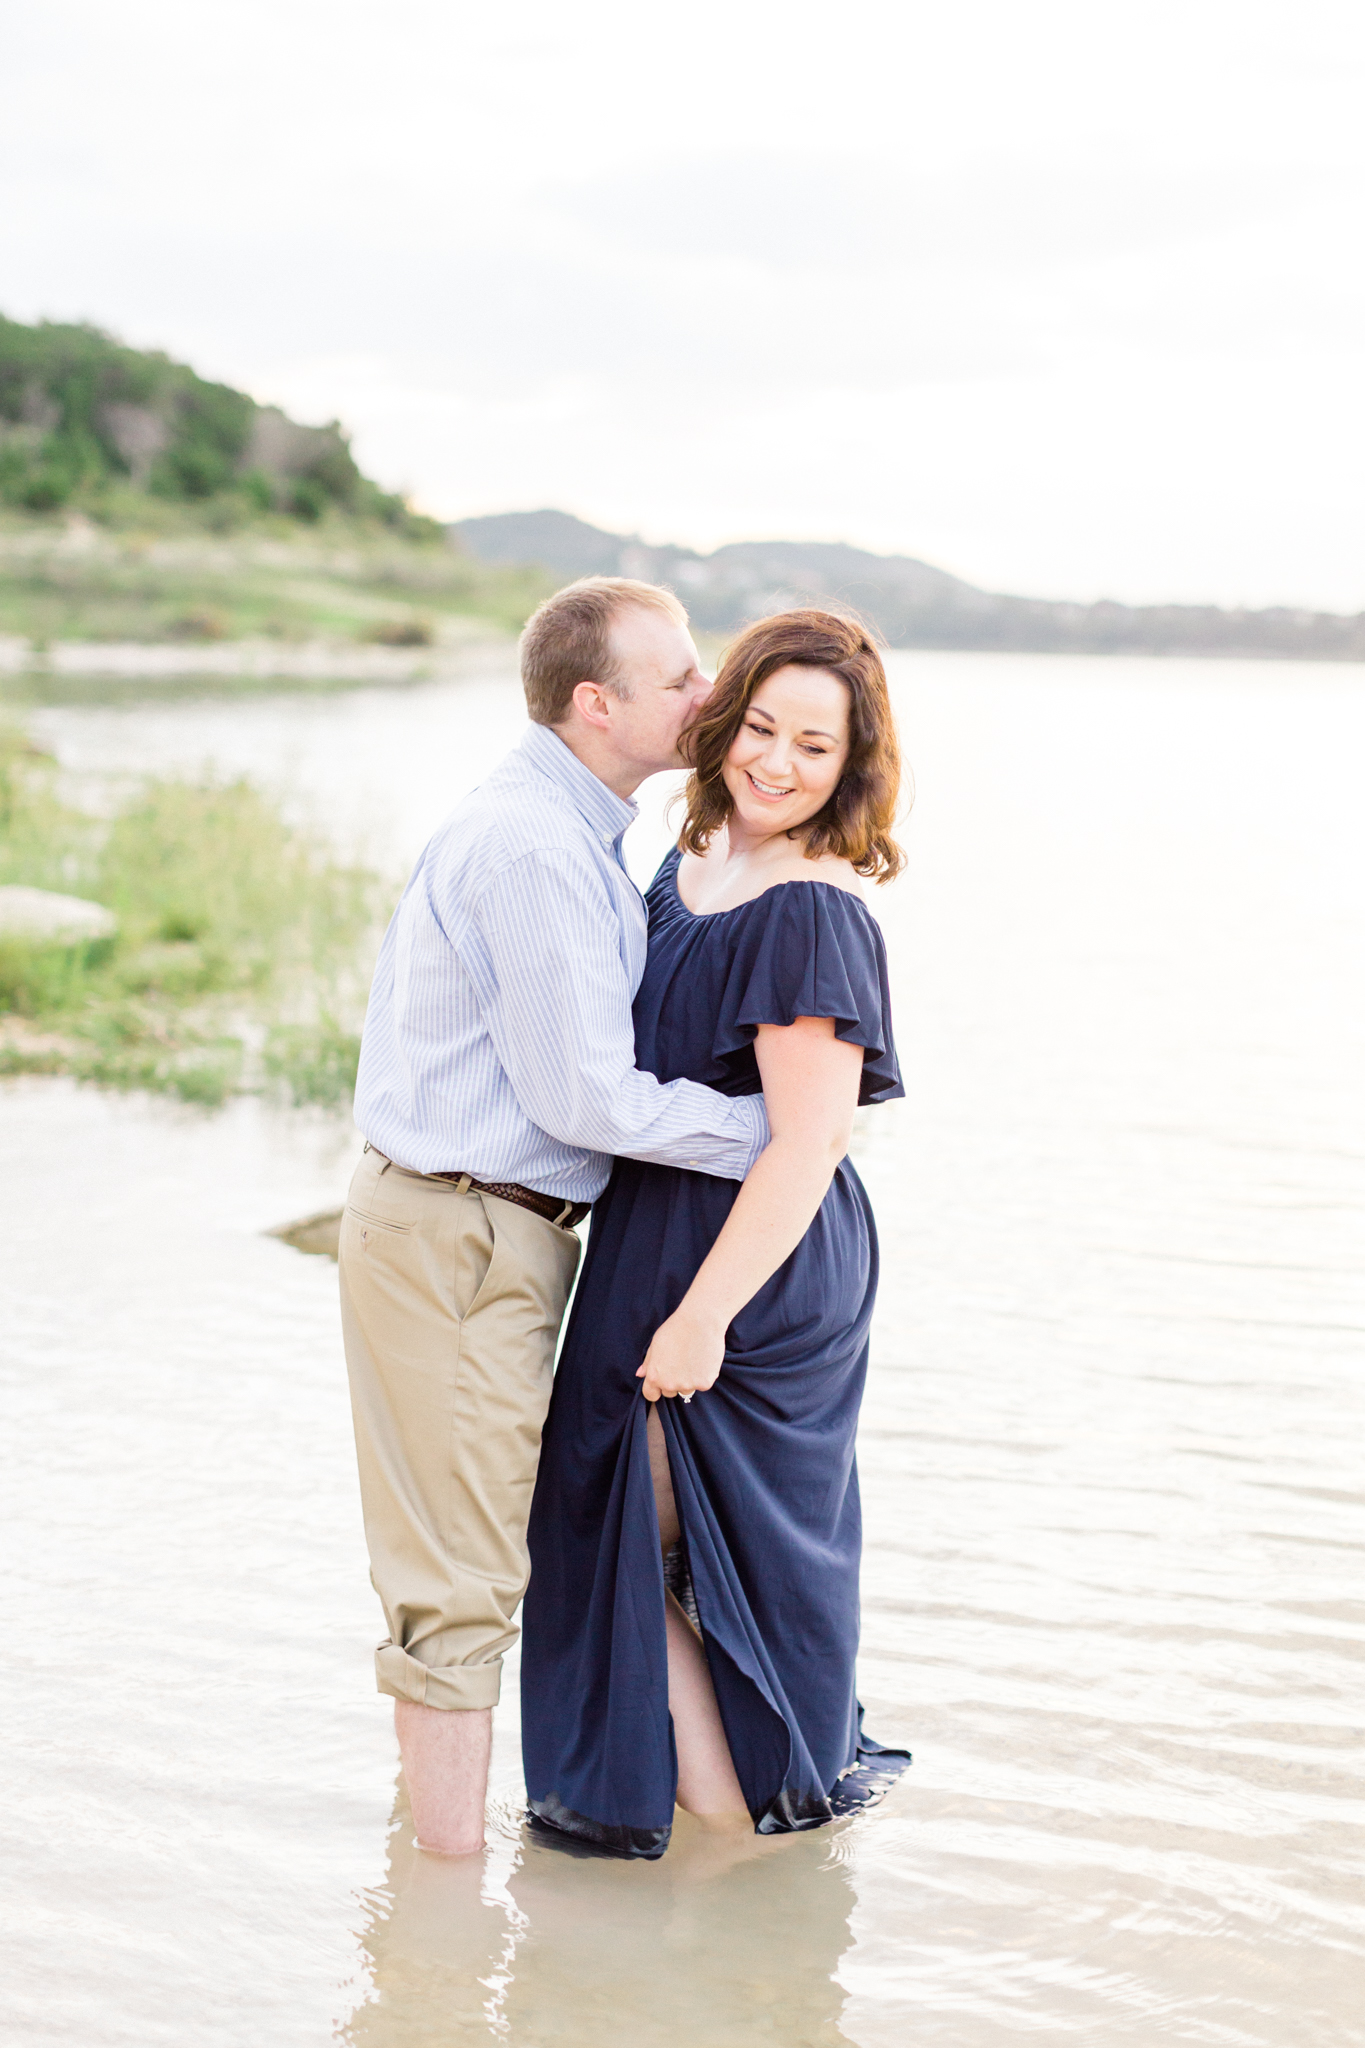 San Antonio Austin Tx Texas Hill Country Canyon Lake Overlook Park Session Wedding Engagement Anniversary Photographer Engagement Anniversary Photo Session Pictures